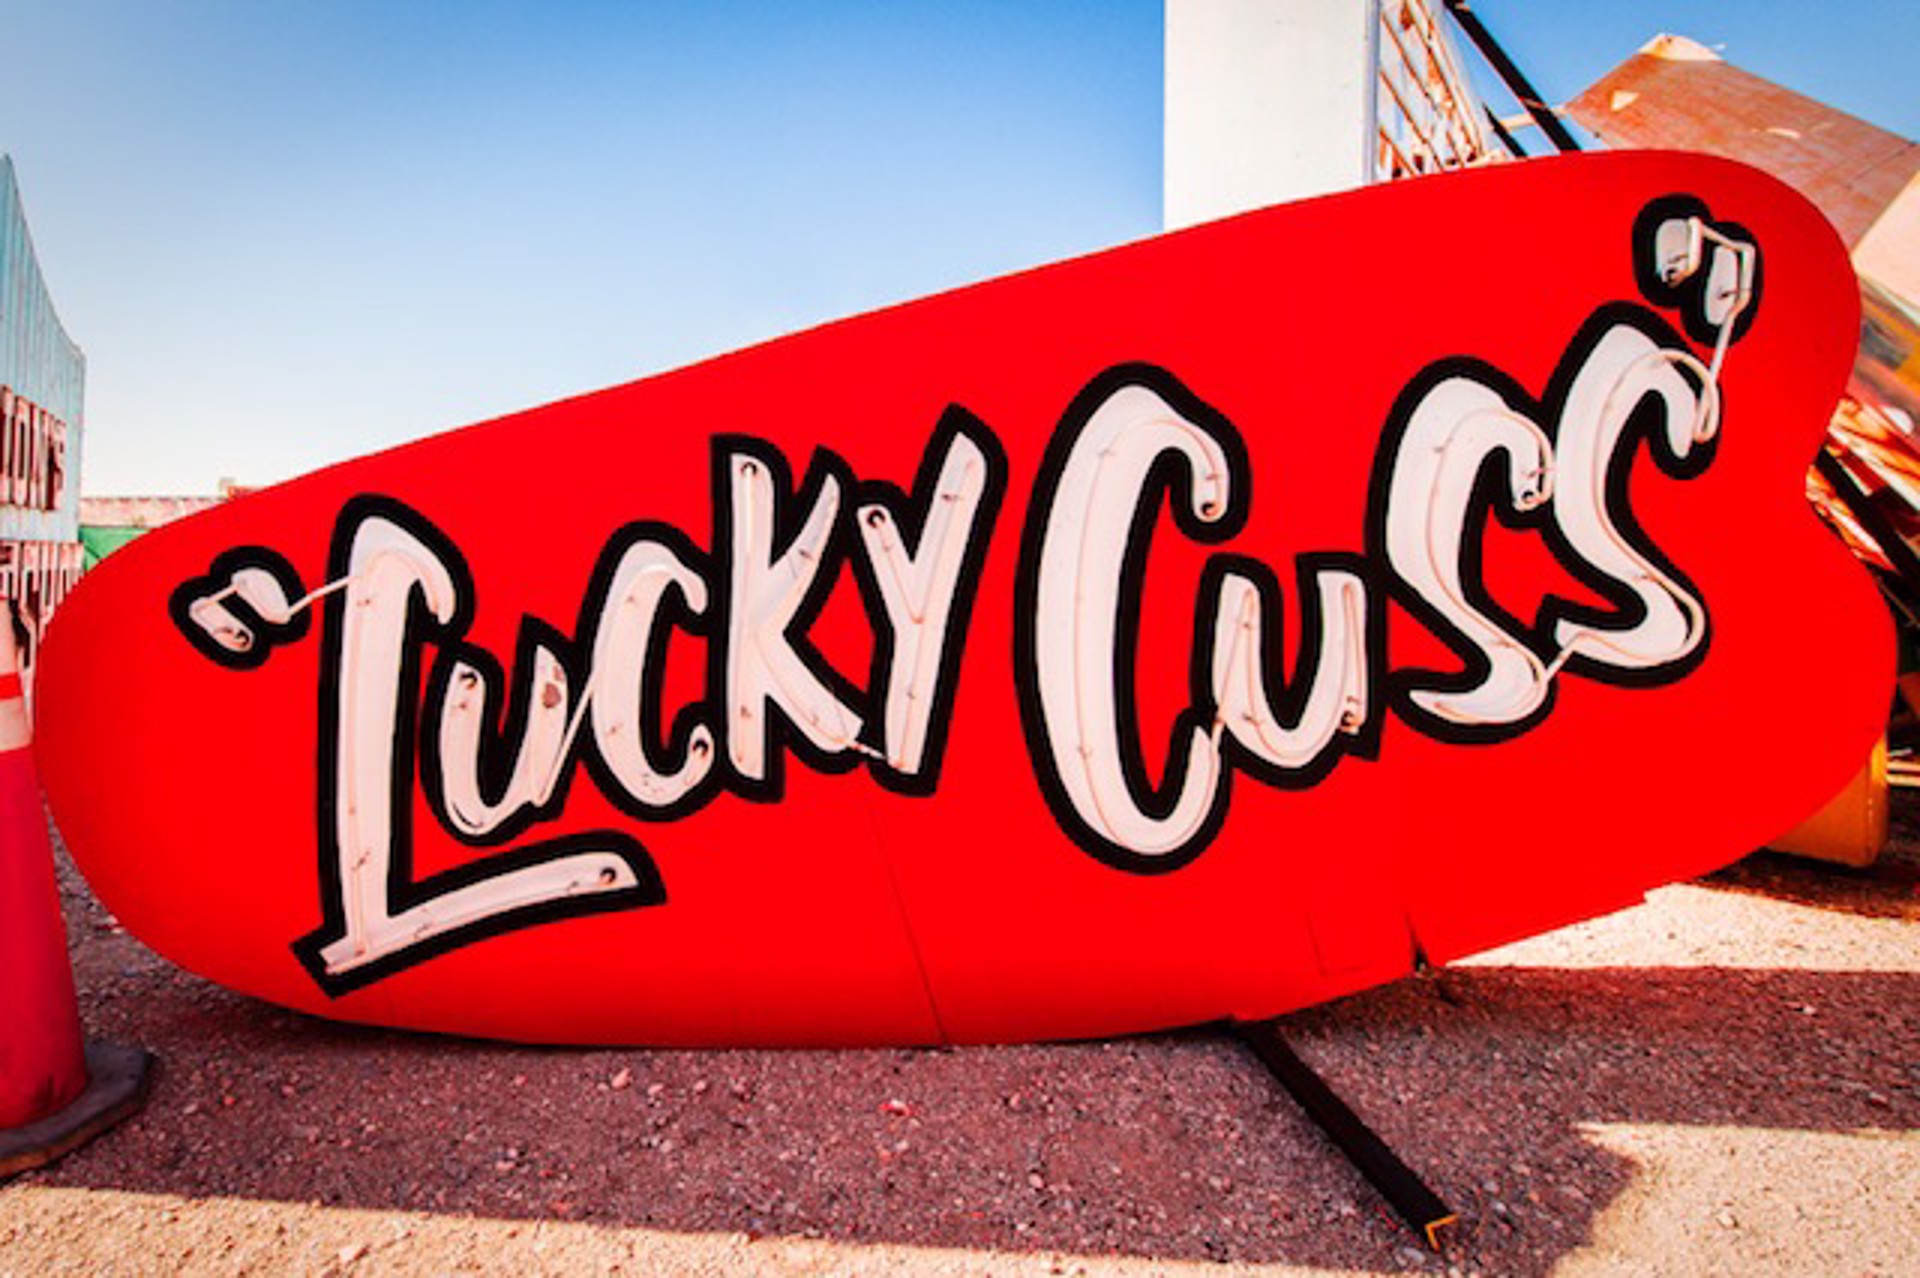 Lucky Cuss by Peter Mendelson